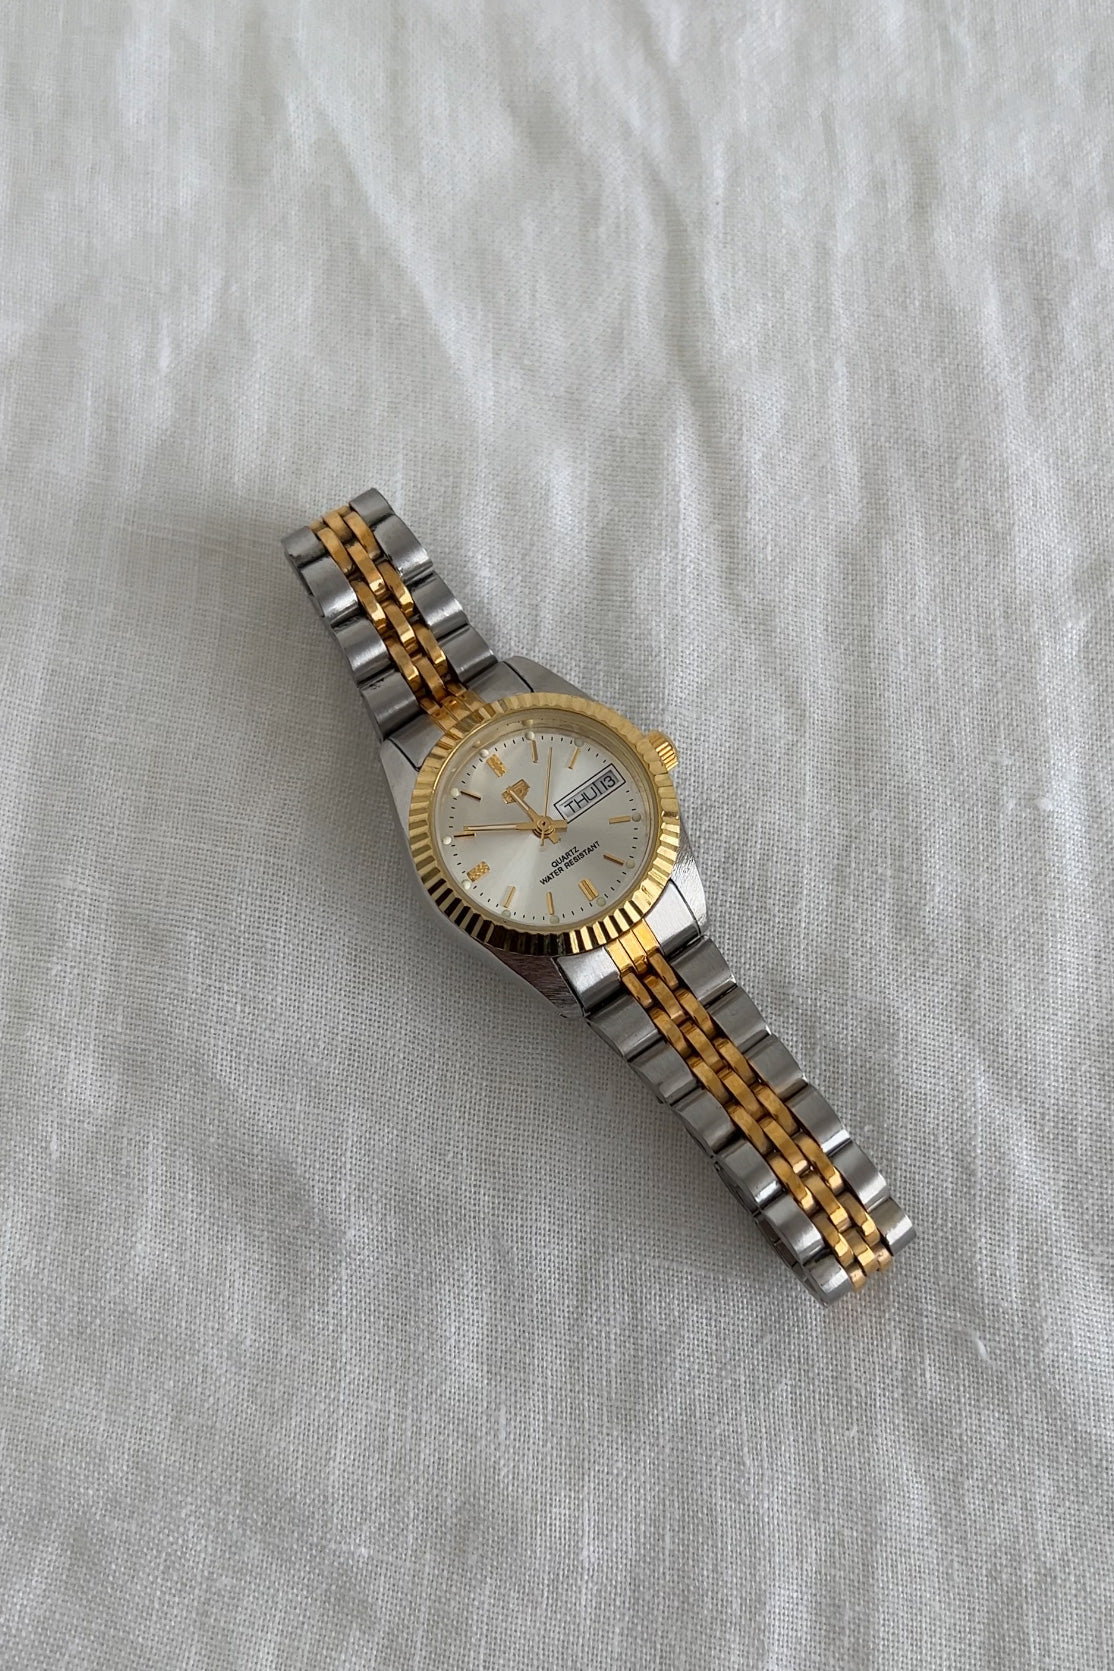 Vintage Silver and Gold Tone Quartz Slip On Watch